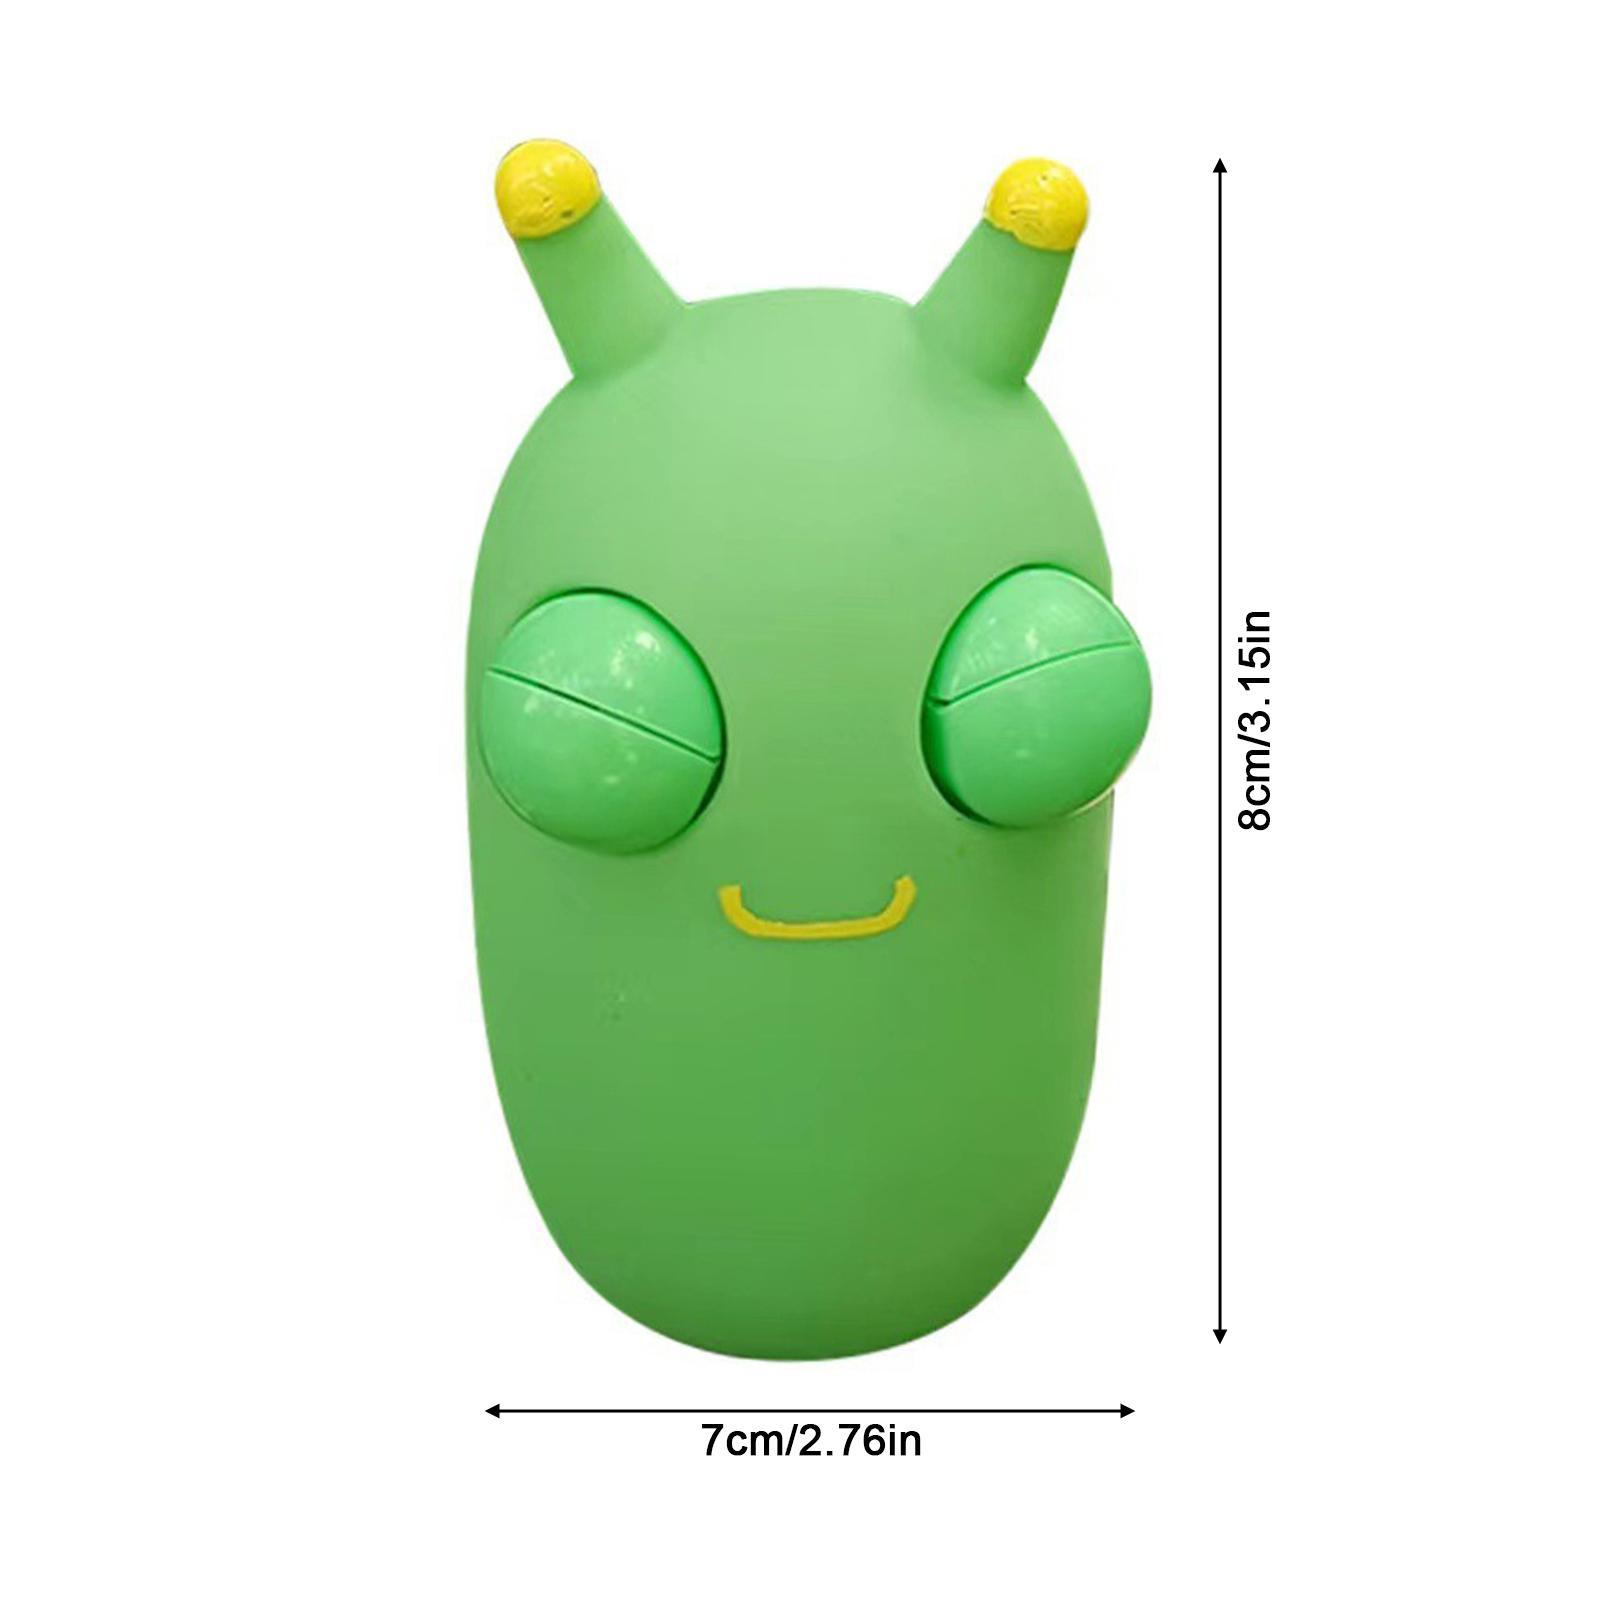 POPPING EYES , ANTISTRESS TOY ADULT KIDS